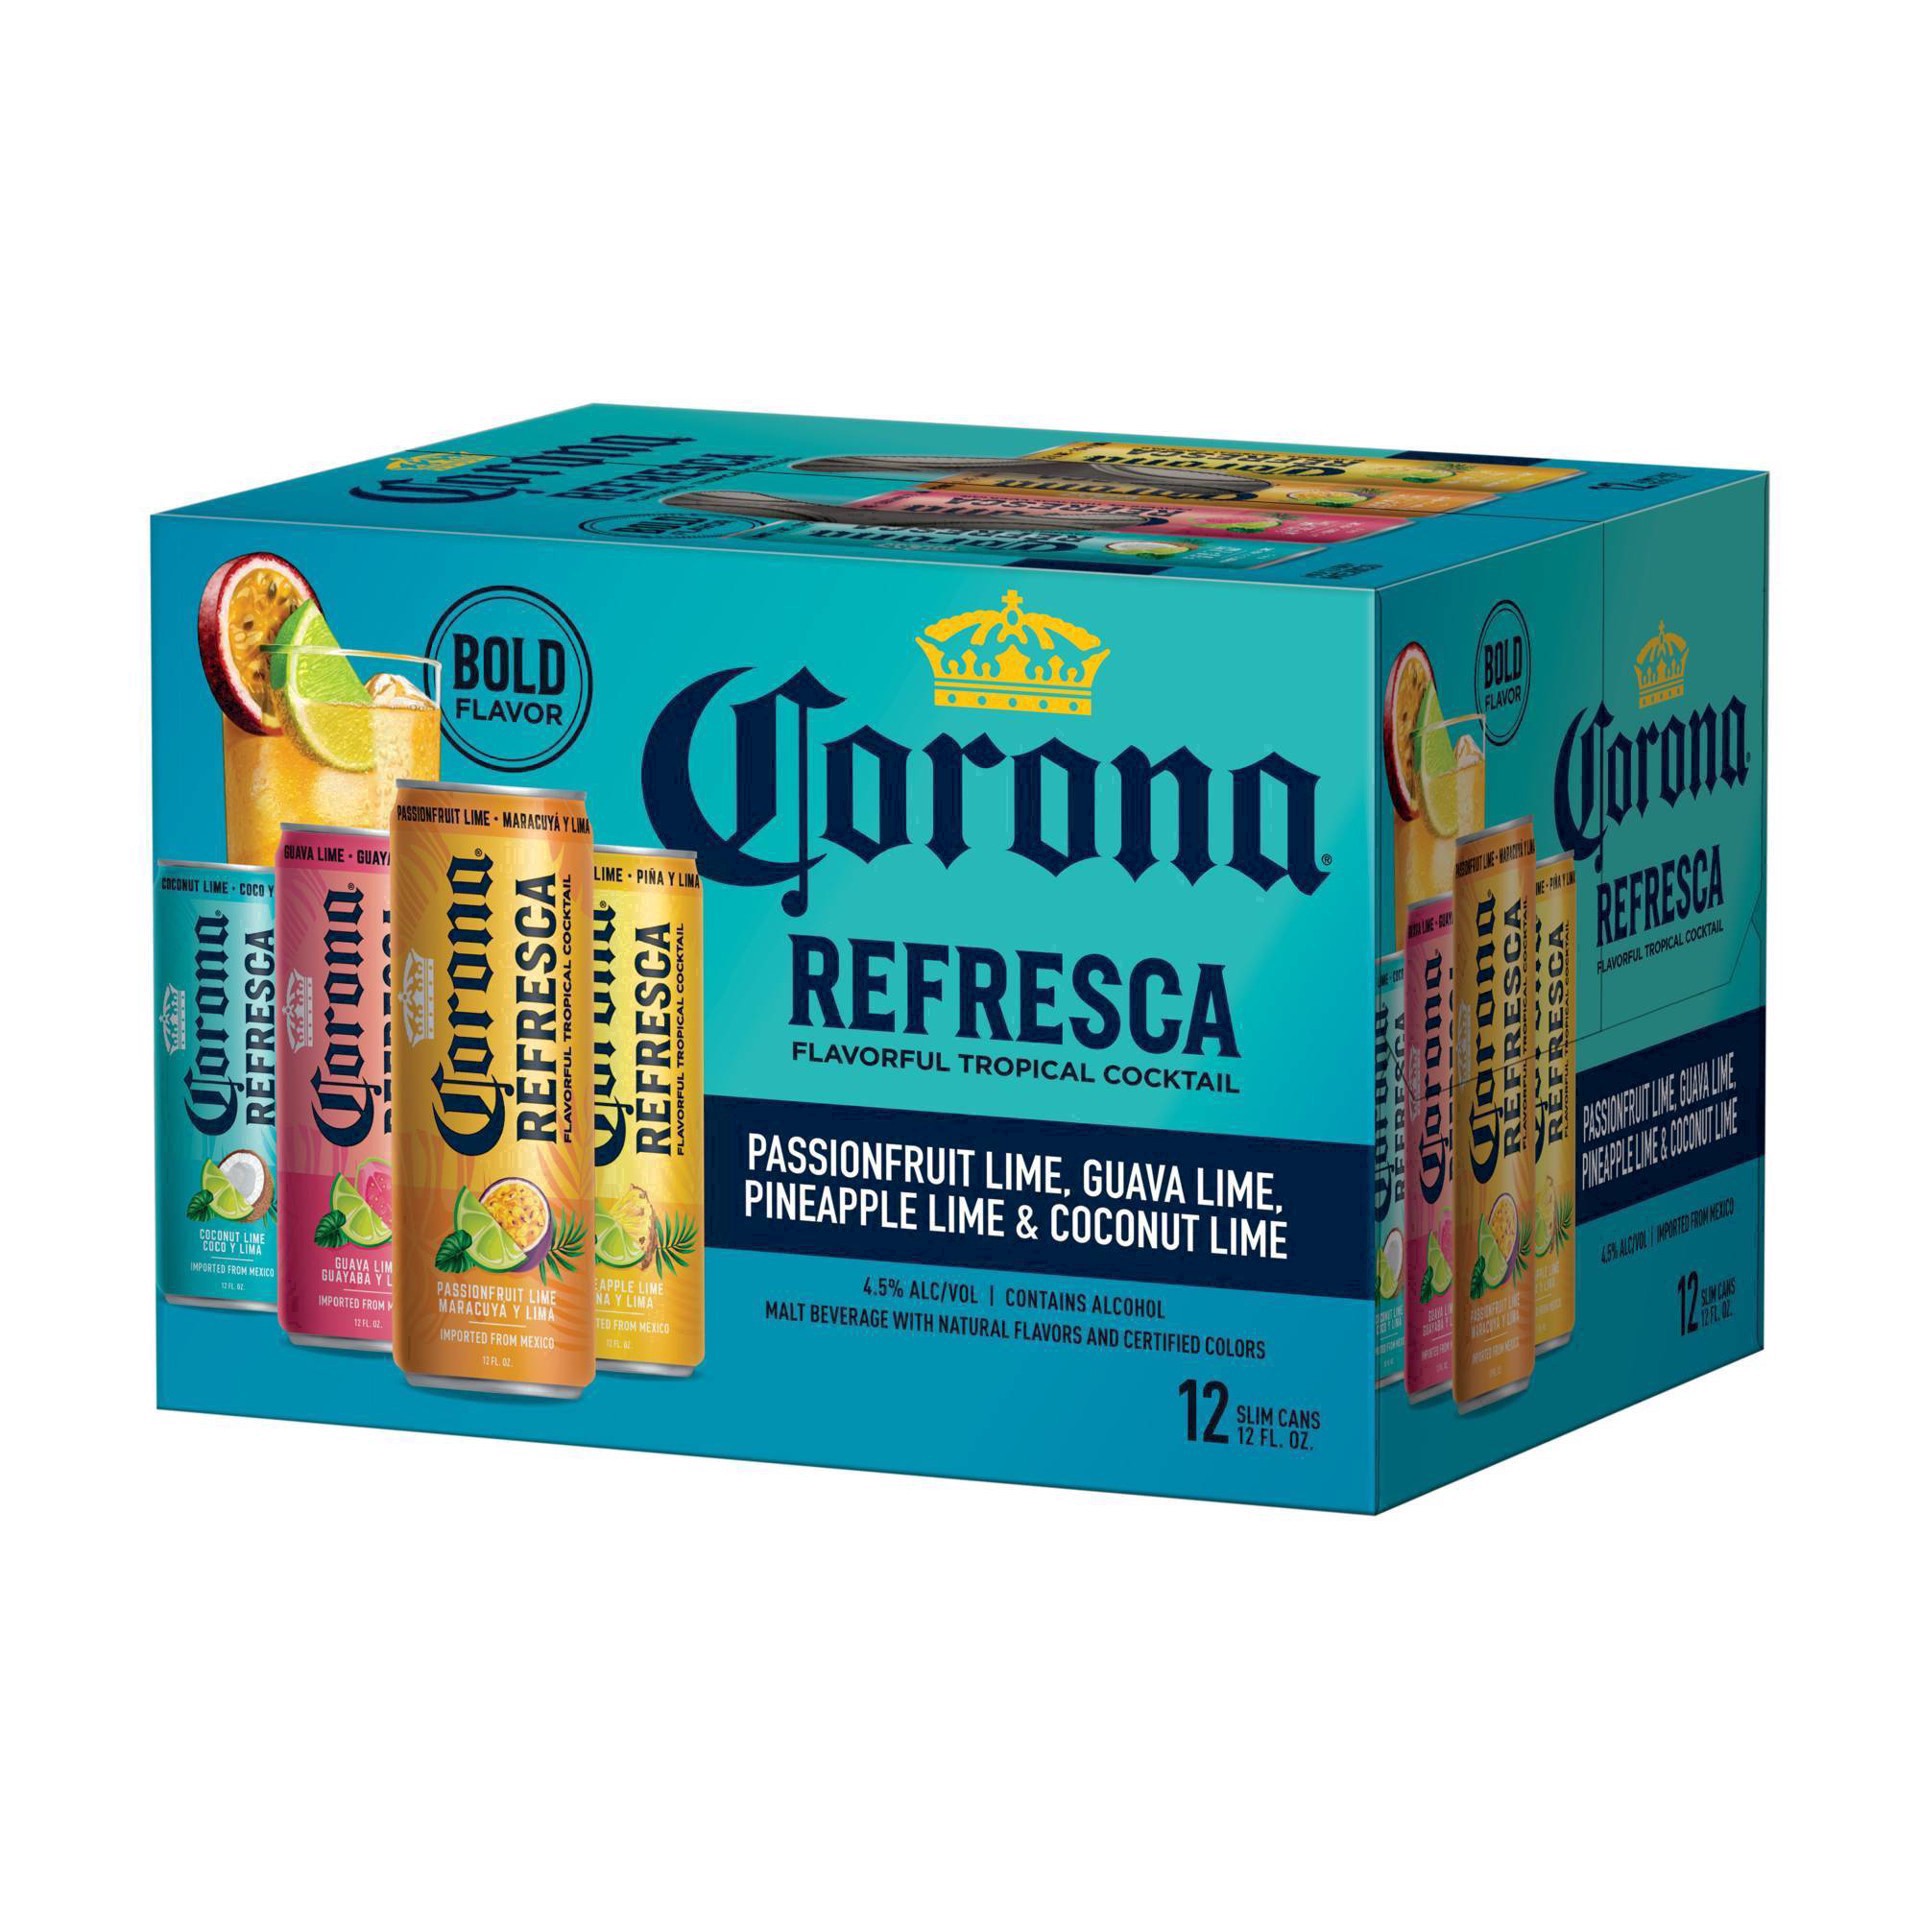 slide 67 of 113, Corona Refresca Hard Tropical Punch Variety Pack Cans, 144 fl oz